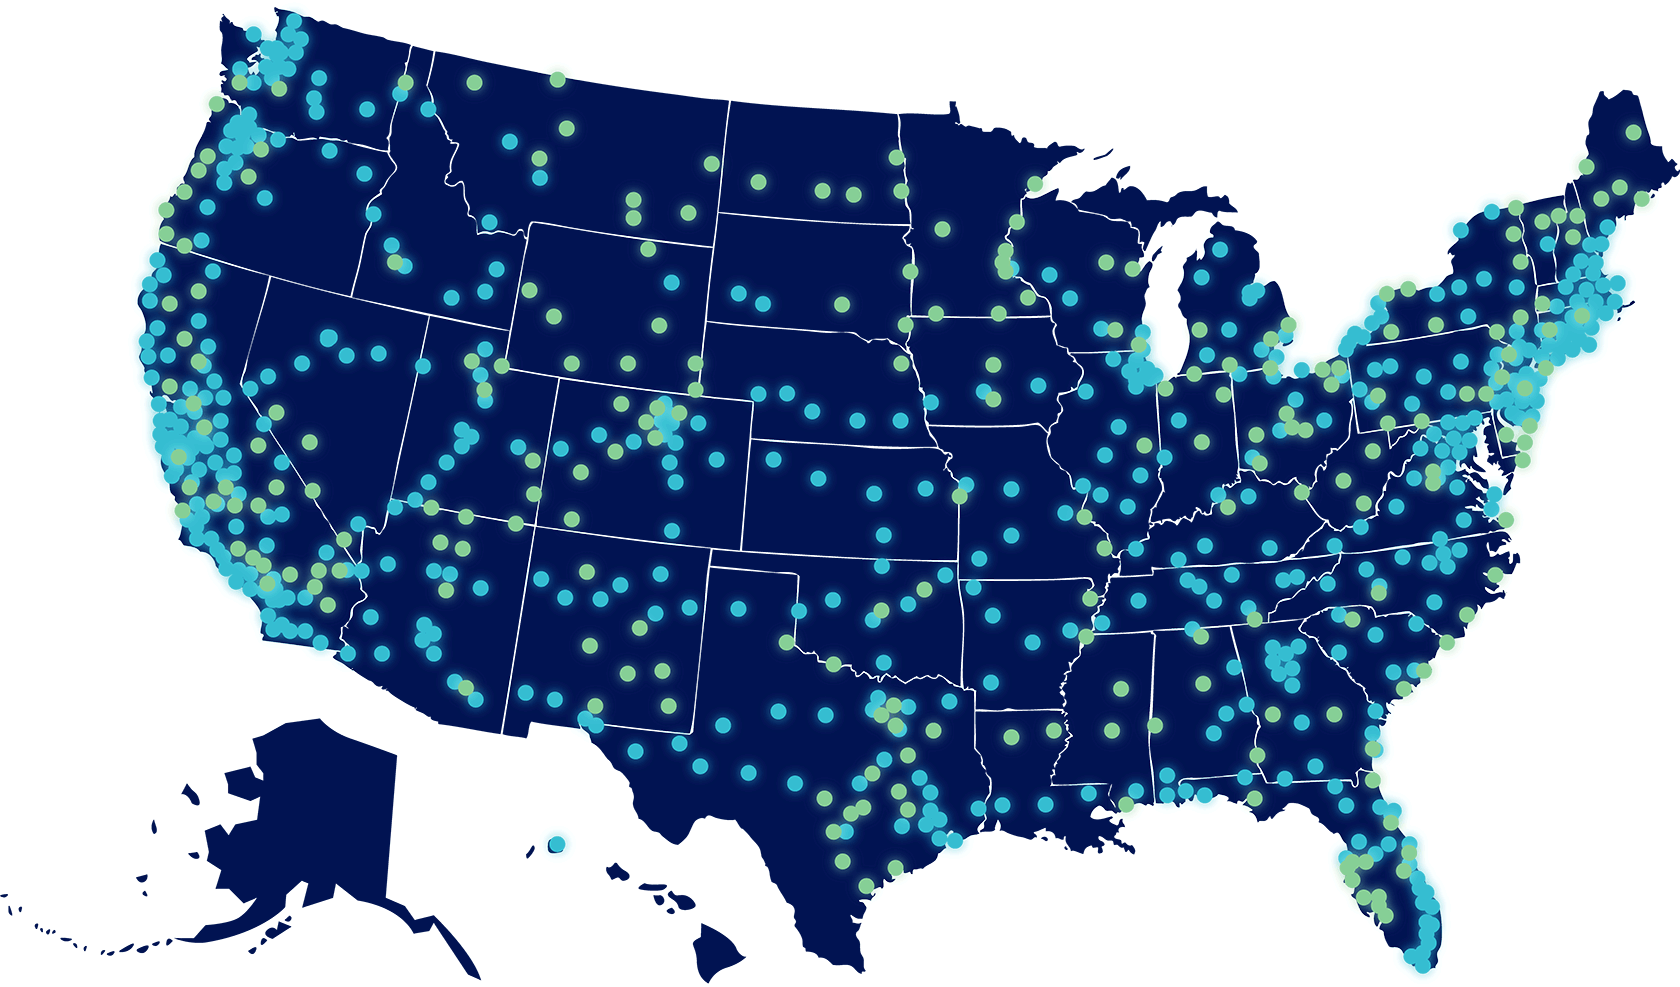 Map of America with hundreds of light blue dots denoting stations in operation or development as of August 2022. The same map has over a hundred light green dots denoting planned station locations by 2026. Network map coverage for illustrative purposes only.